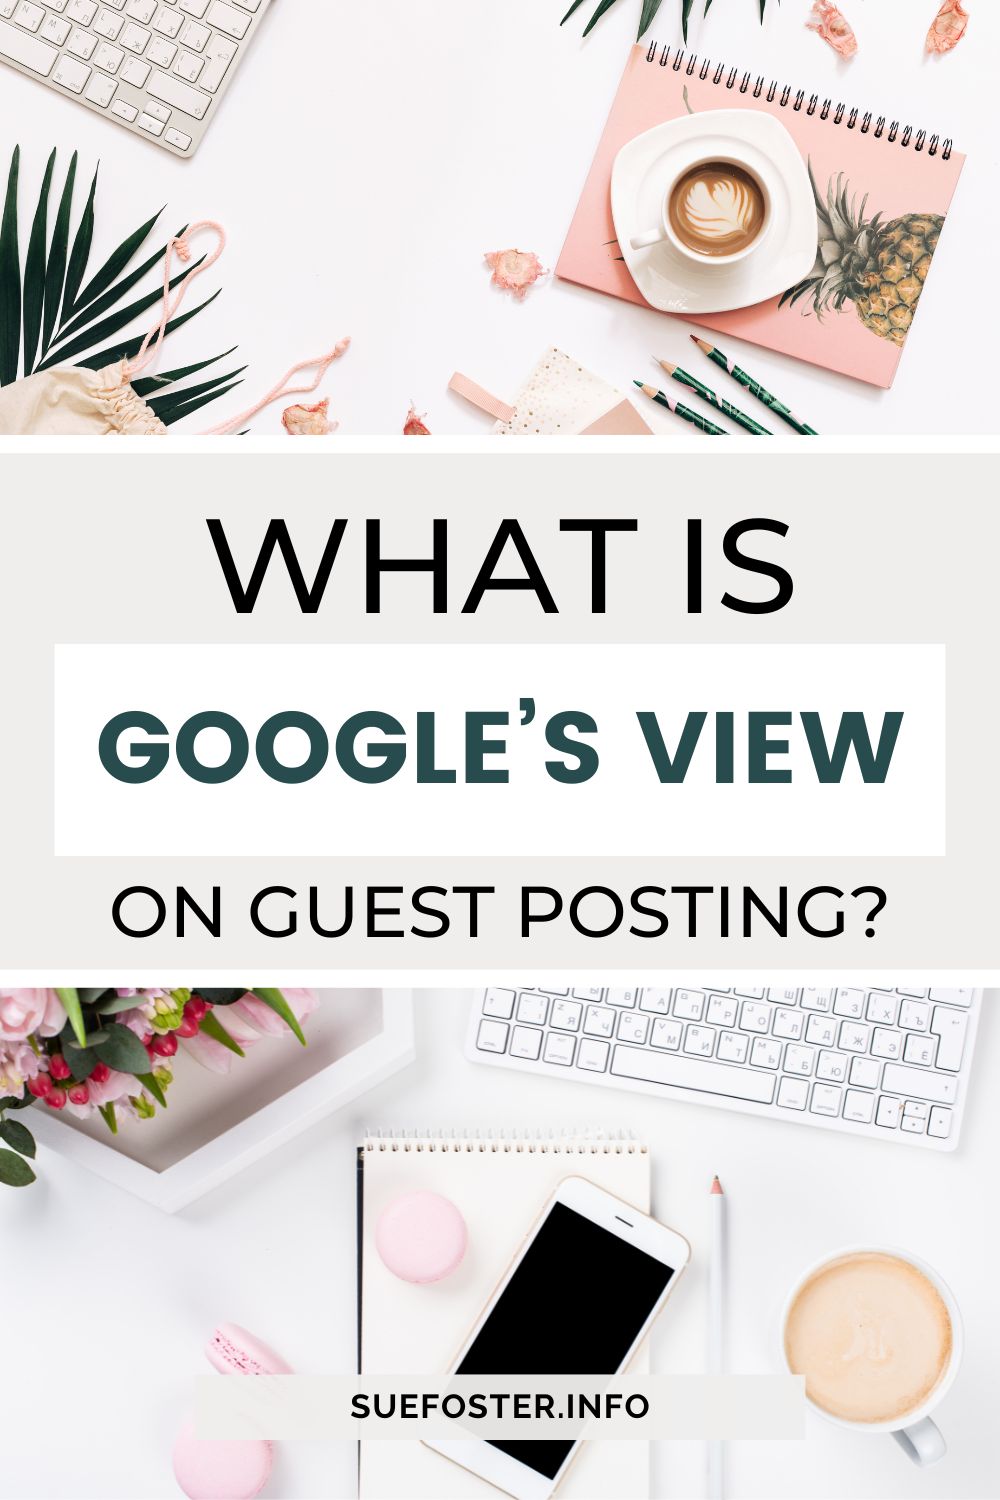 Learn how Google views guest posting: prioritise valuable content, transparency, & quality over manipulative SEO tactics. No harsh penalties, but focus on genuine value.